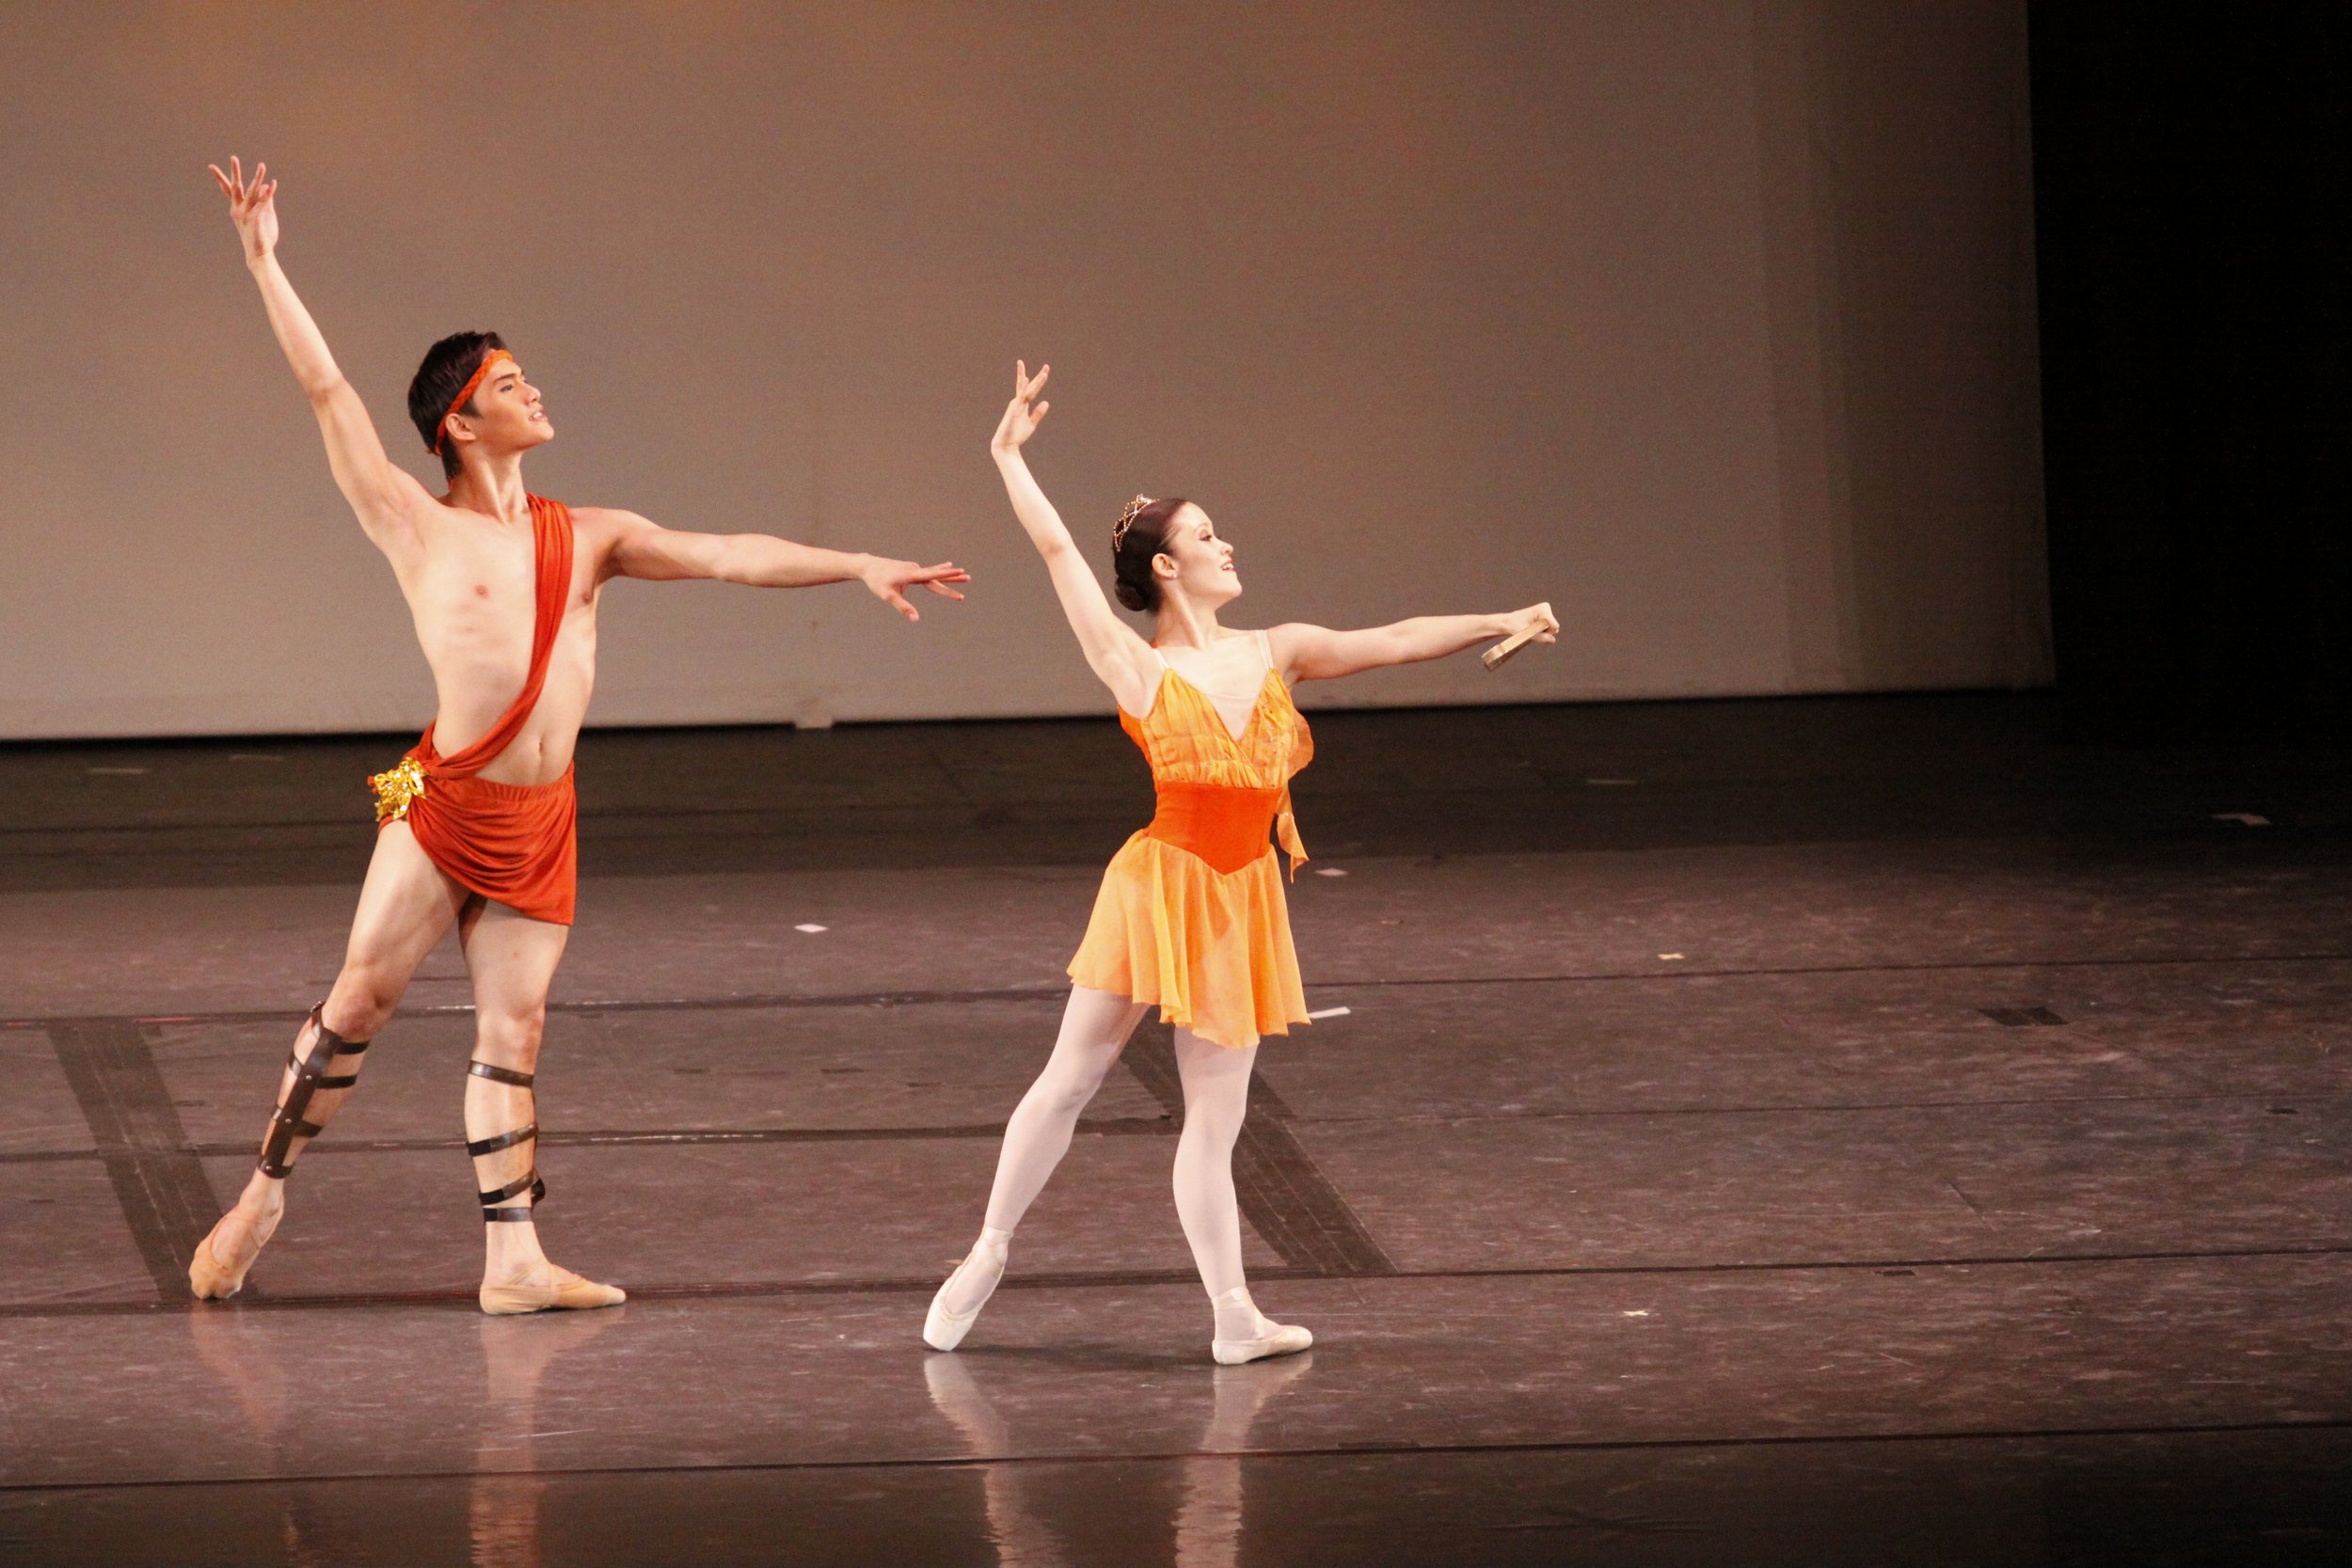    The relationship between Acteon (Alfren Salgado) and Diane (Tiffany Chiang-Janolo) is heightened, thanks to their complementing costumes in shades of orange.  Diane and Acteon , a popular pas de deux from the ballet  Esmeralda  about the goddess f